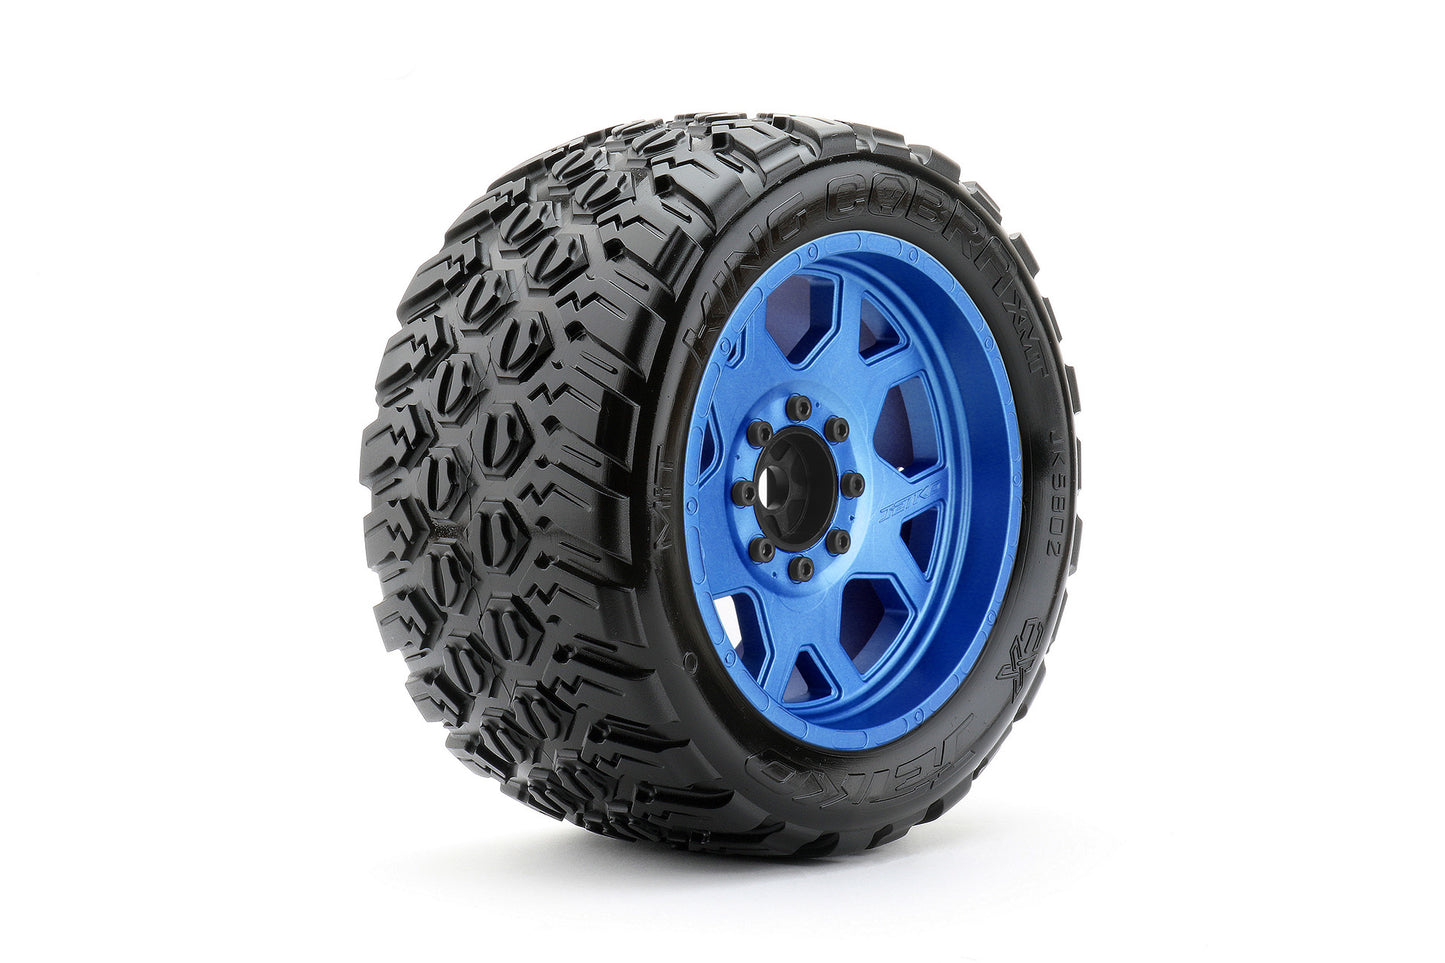 1/5 XMT EX-King Cobra Tires Mounted on Metal Claw Rims, Medium Soft, Glued, Belted, 24mm, for Traxxas X-Maxx